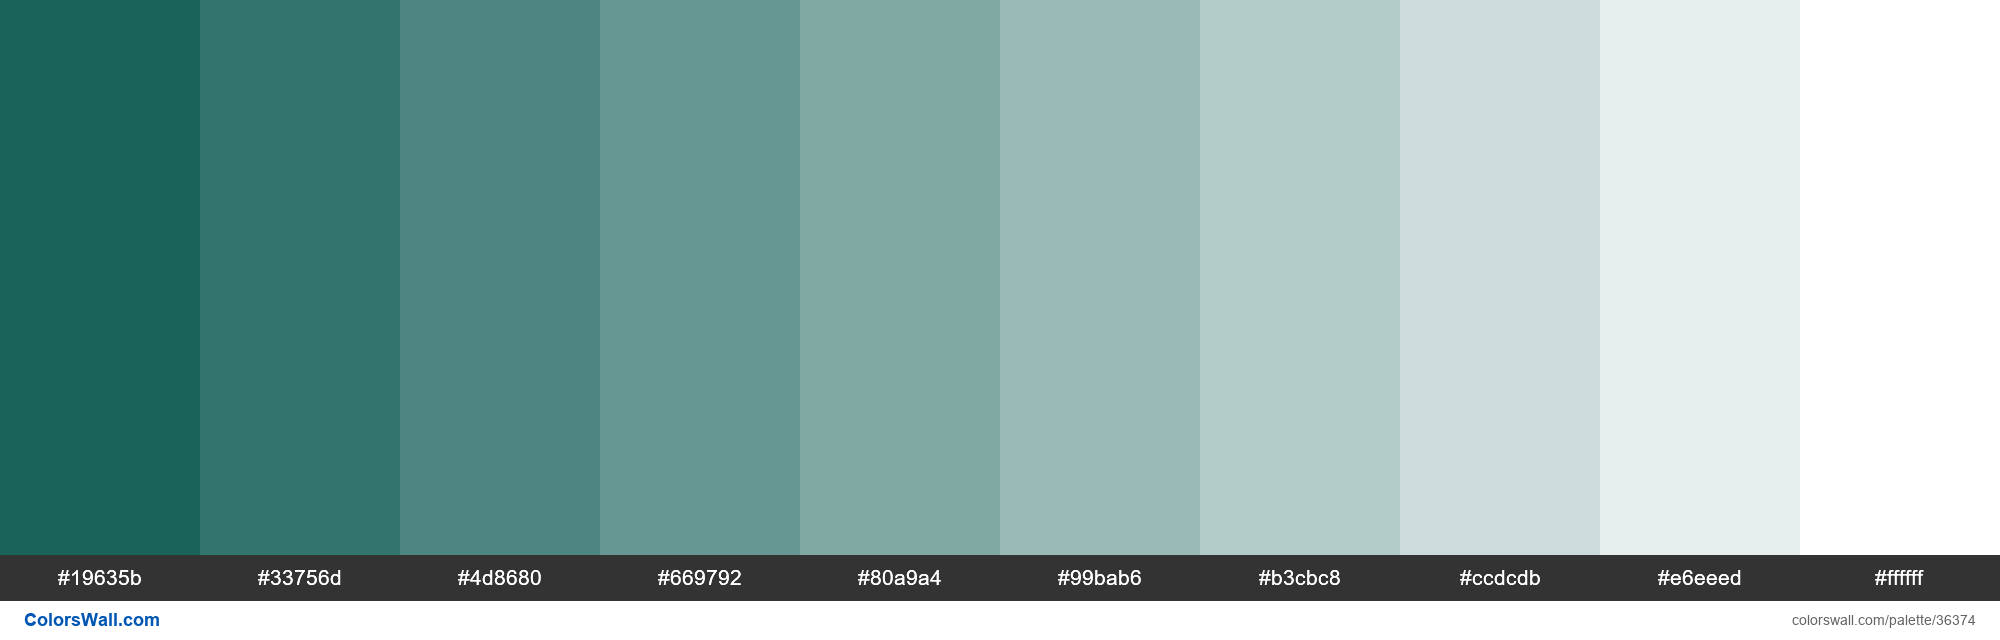 Tints Xkcd Color Dark Blue Green 005249 Hex 36374 Colorswall 